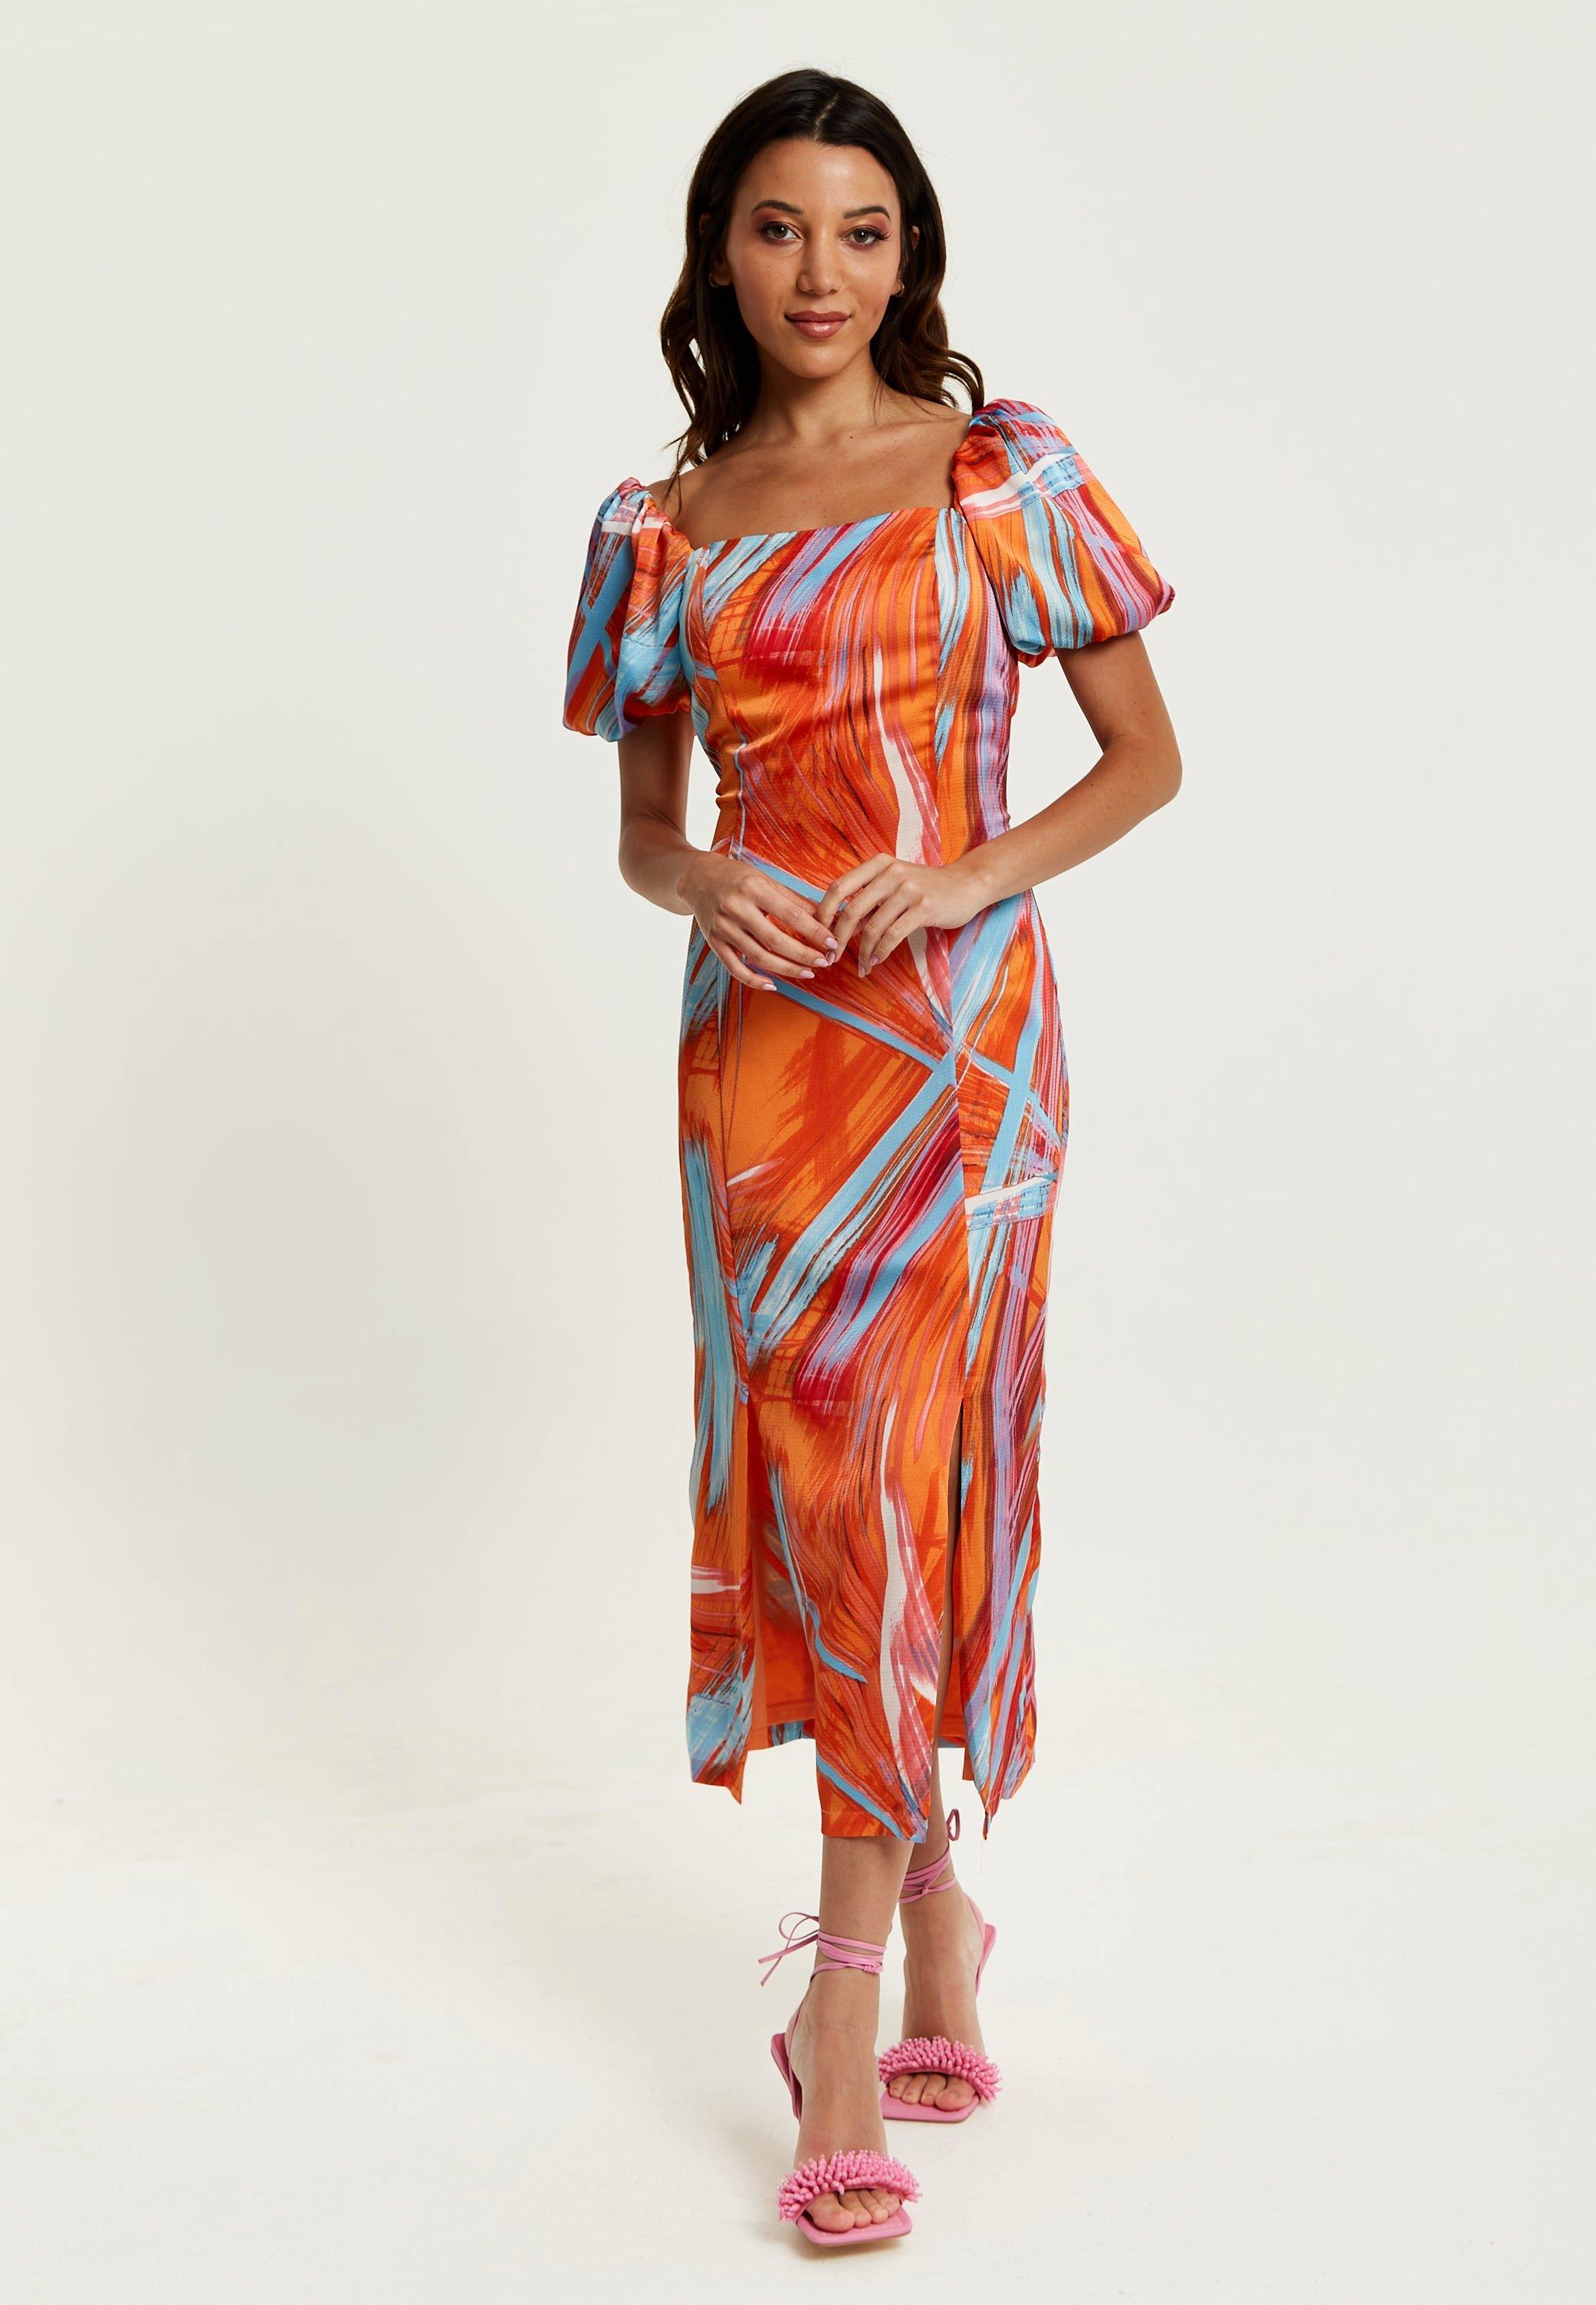 Abstract Print Midi Dress With a Square neck and Low Back in Orange